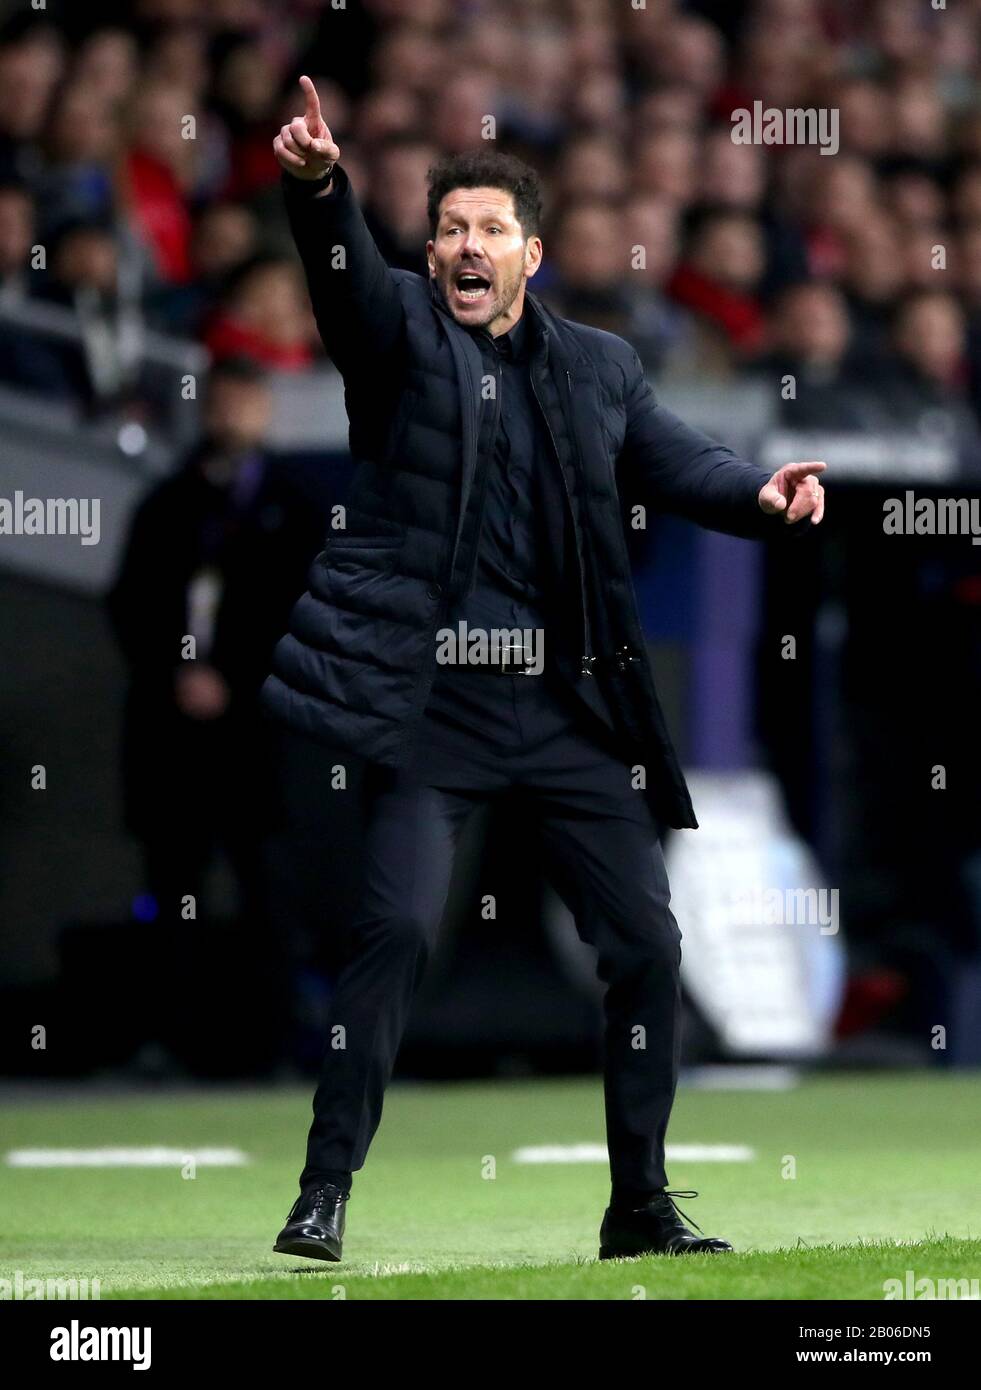 Atletico Madrid manager Diego Simeone gestures on the touchline during the UEFA Champions League round of 16 first leg match at Wanda Metropolitano, Madrid. Stock Photo